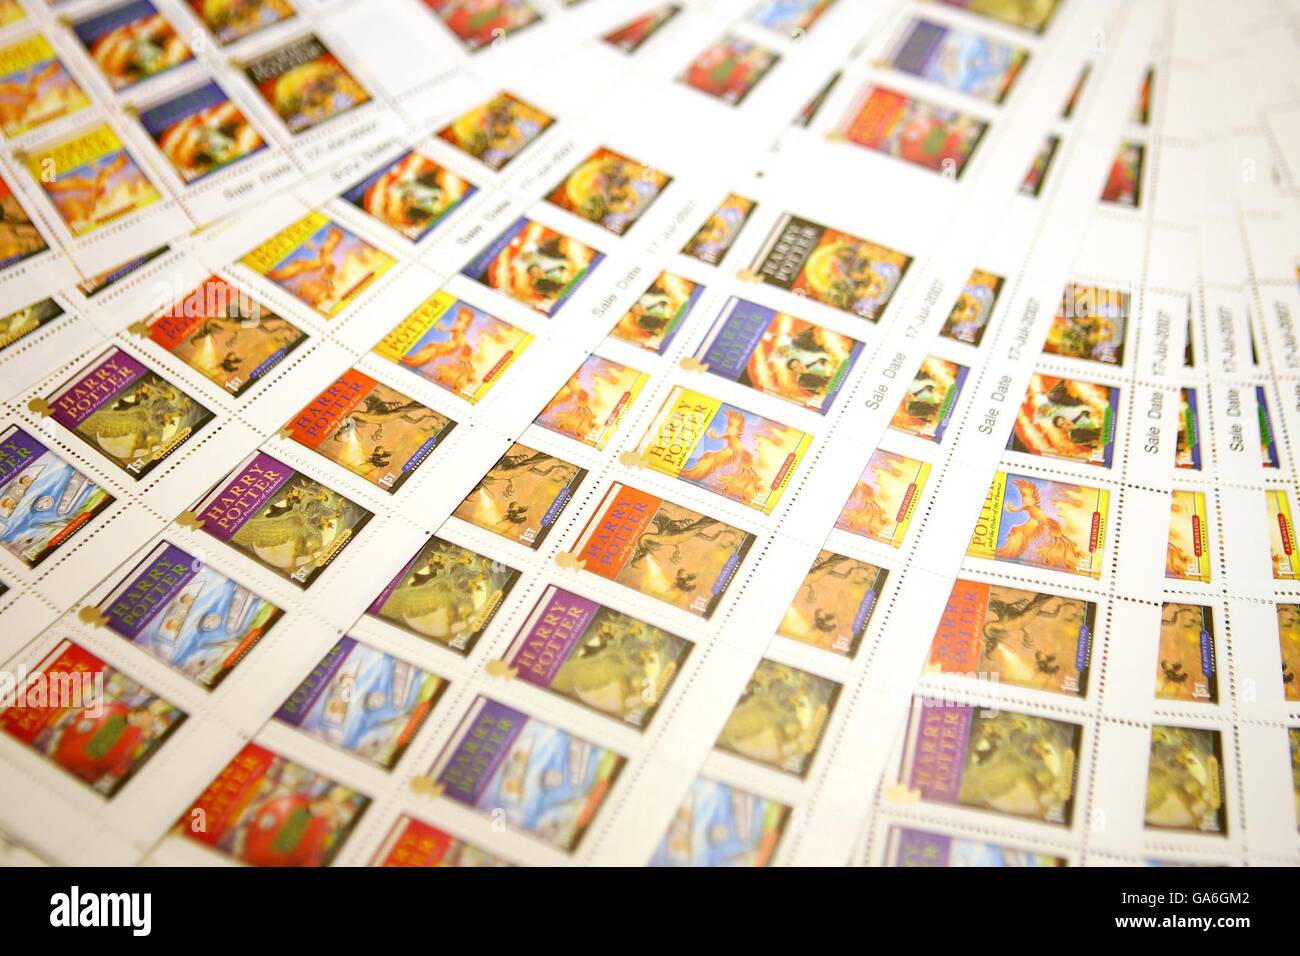 Harry potter stamps hi-res stock photography and images - Alamy